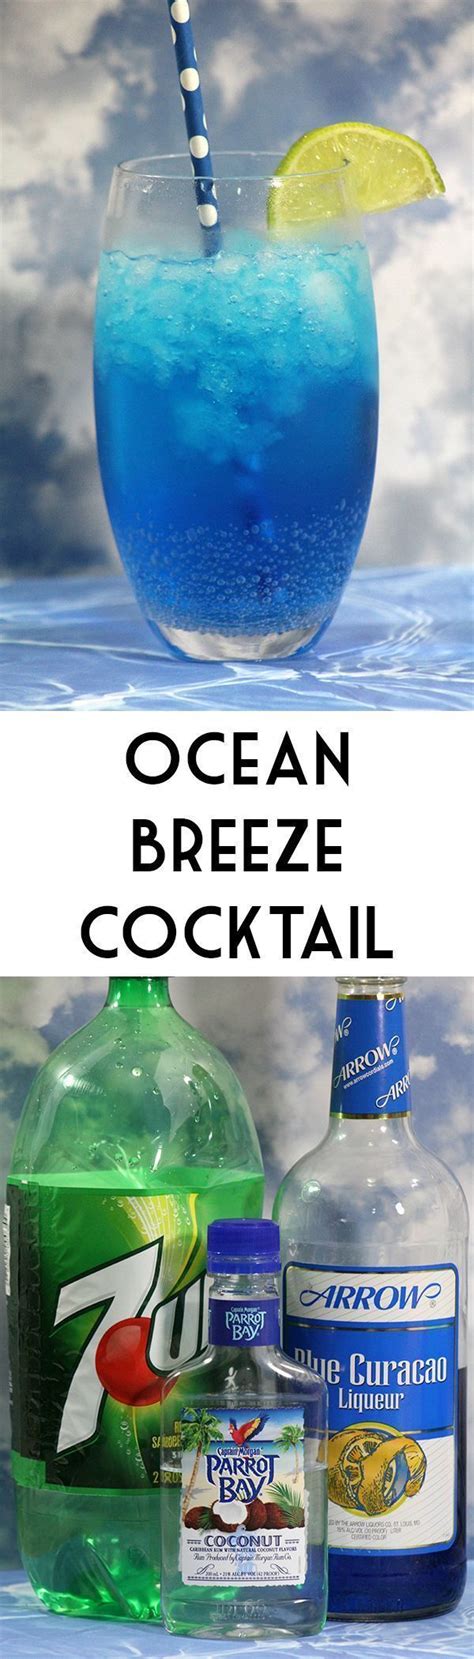 This Ocean Breeze Cocktail Is A Fun Summer Drink For The Beach Or Anywhere You Want To Pretend